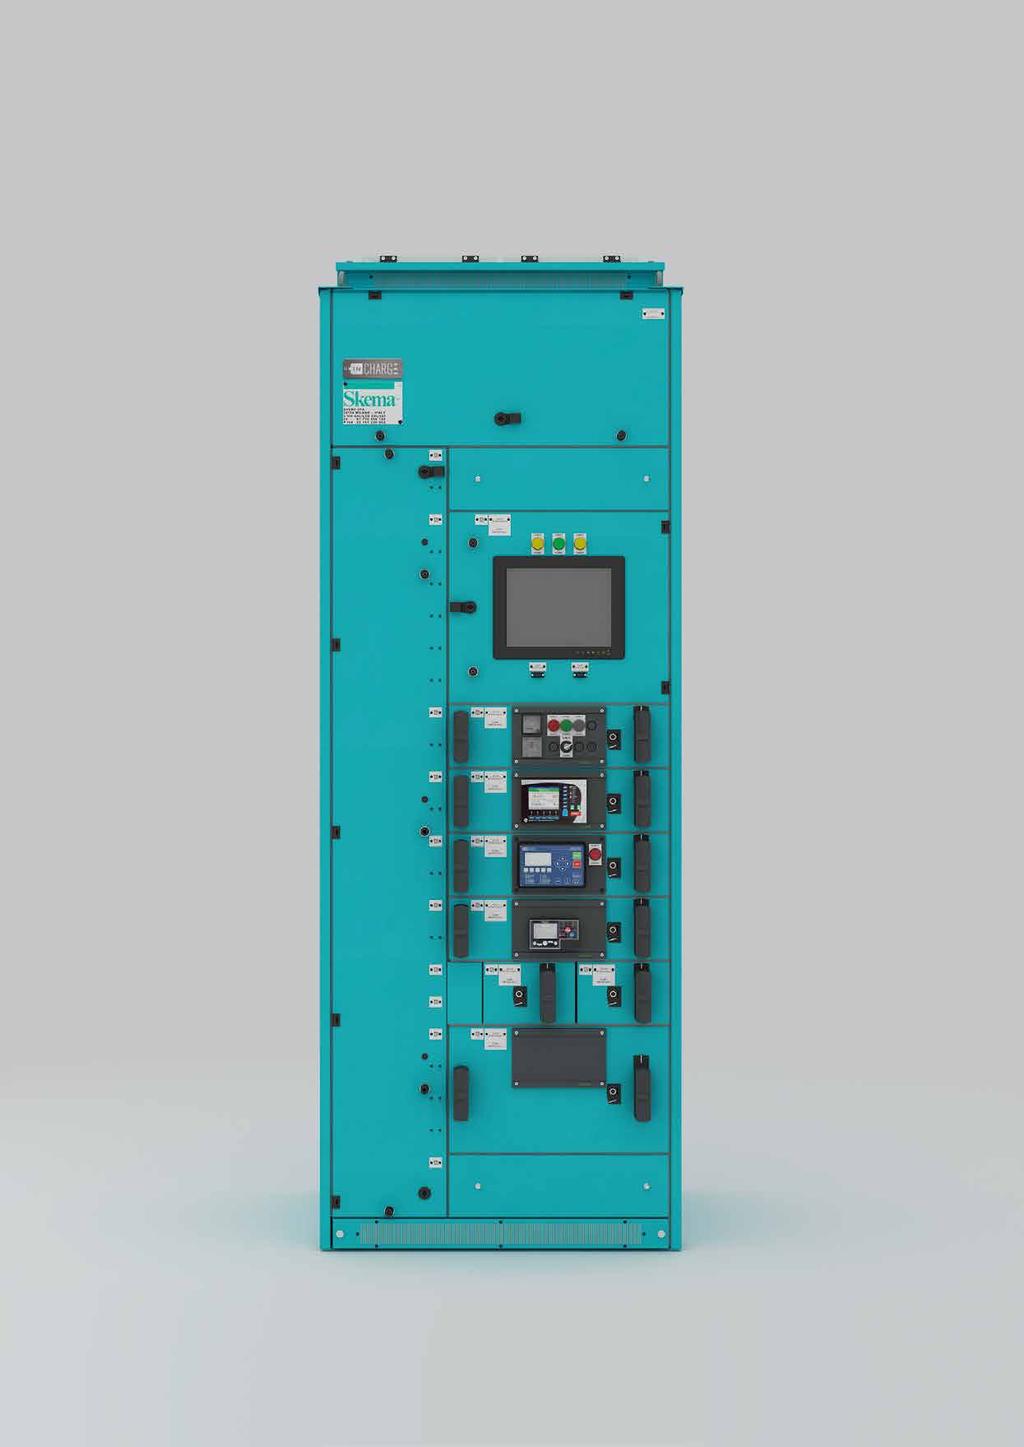 SYSTEM OVERVIEW TECHNICAL FEATURES Design Standard IEC 61439 Rated insulation voltage (Ui) Rated operating voltage (Ue) Rated Frequency (fn) 1000 V Up to 690 V 50/60 Hz Main busbars up to 5000 A